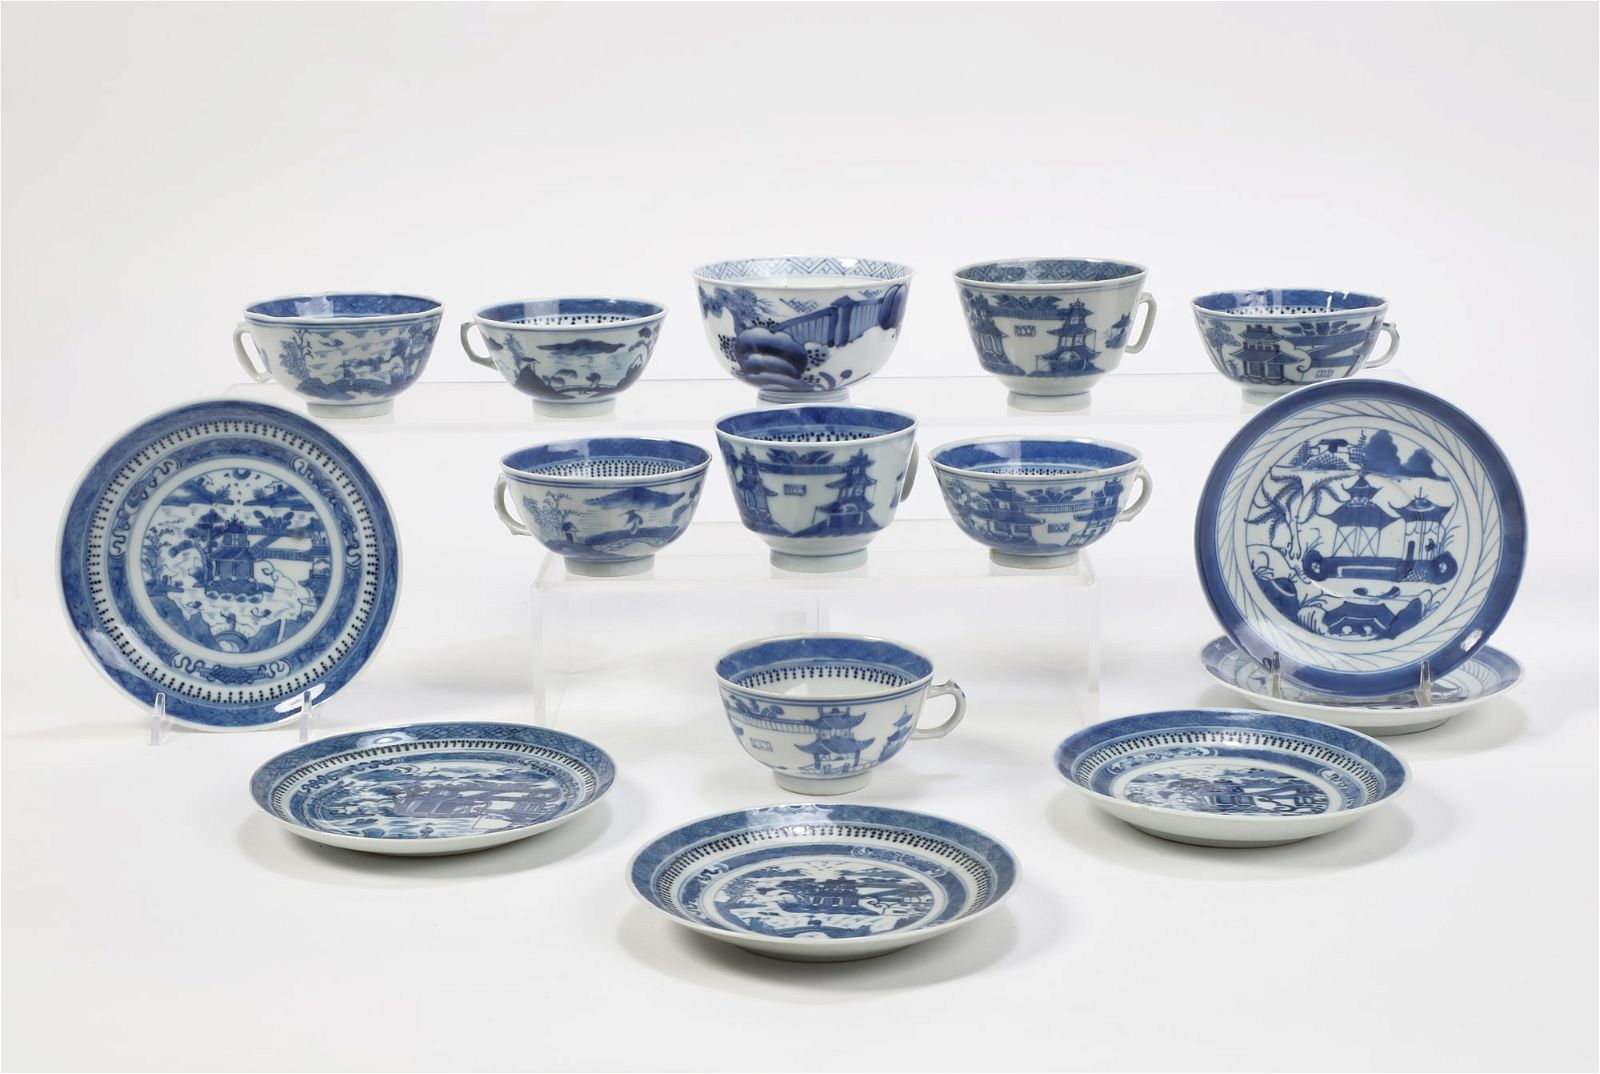 CHINESE EXPORT PORCELAIN PLATES AND